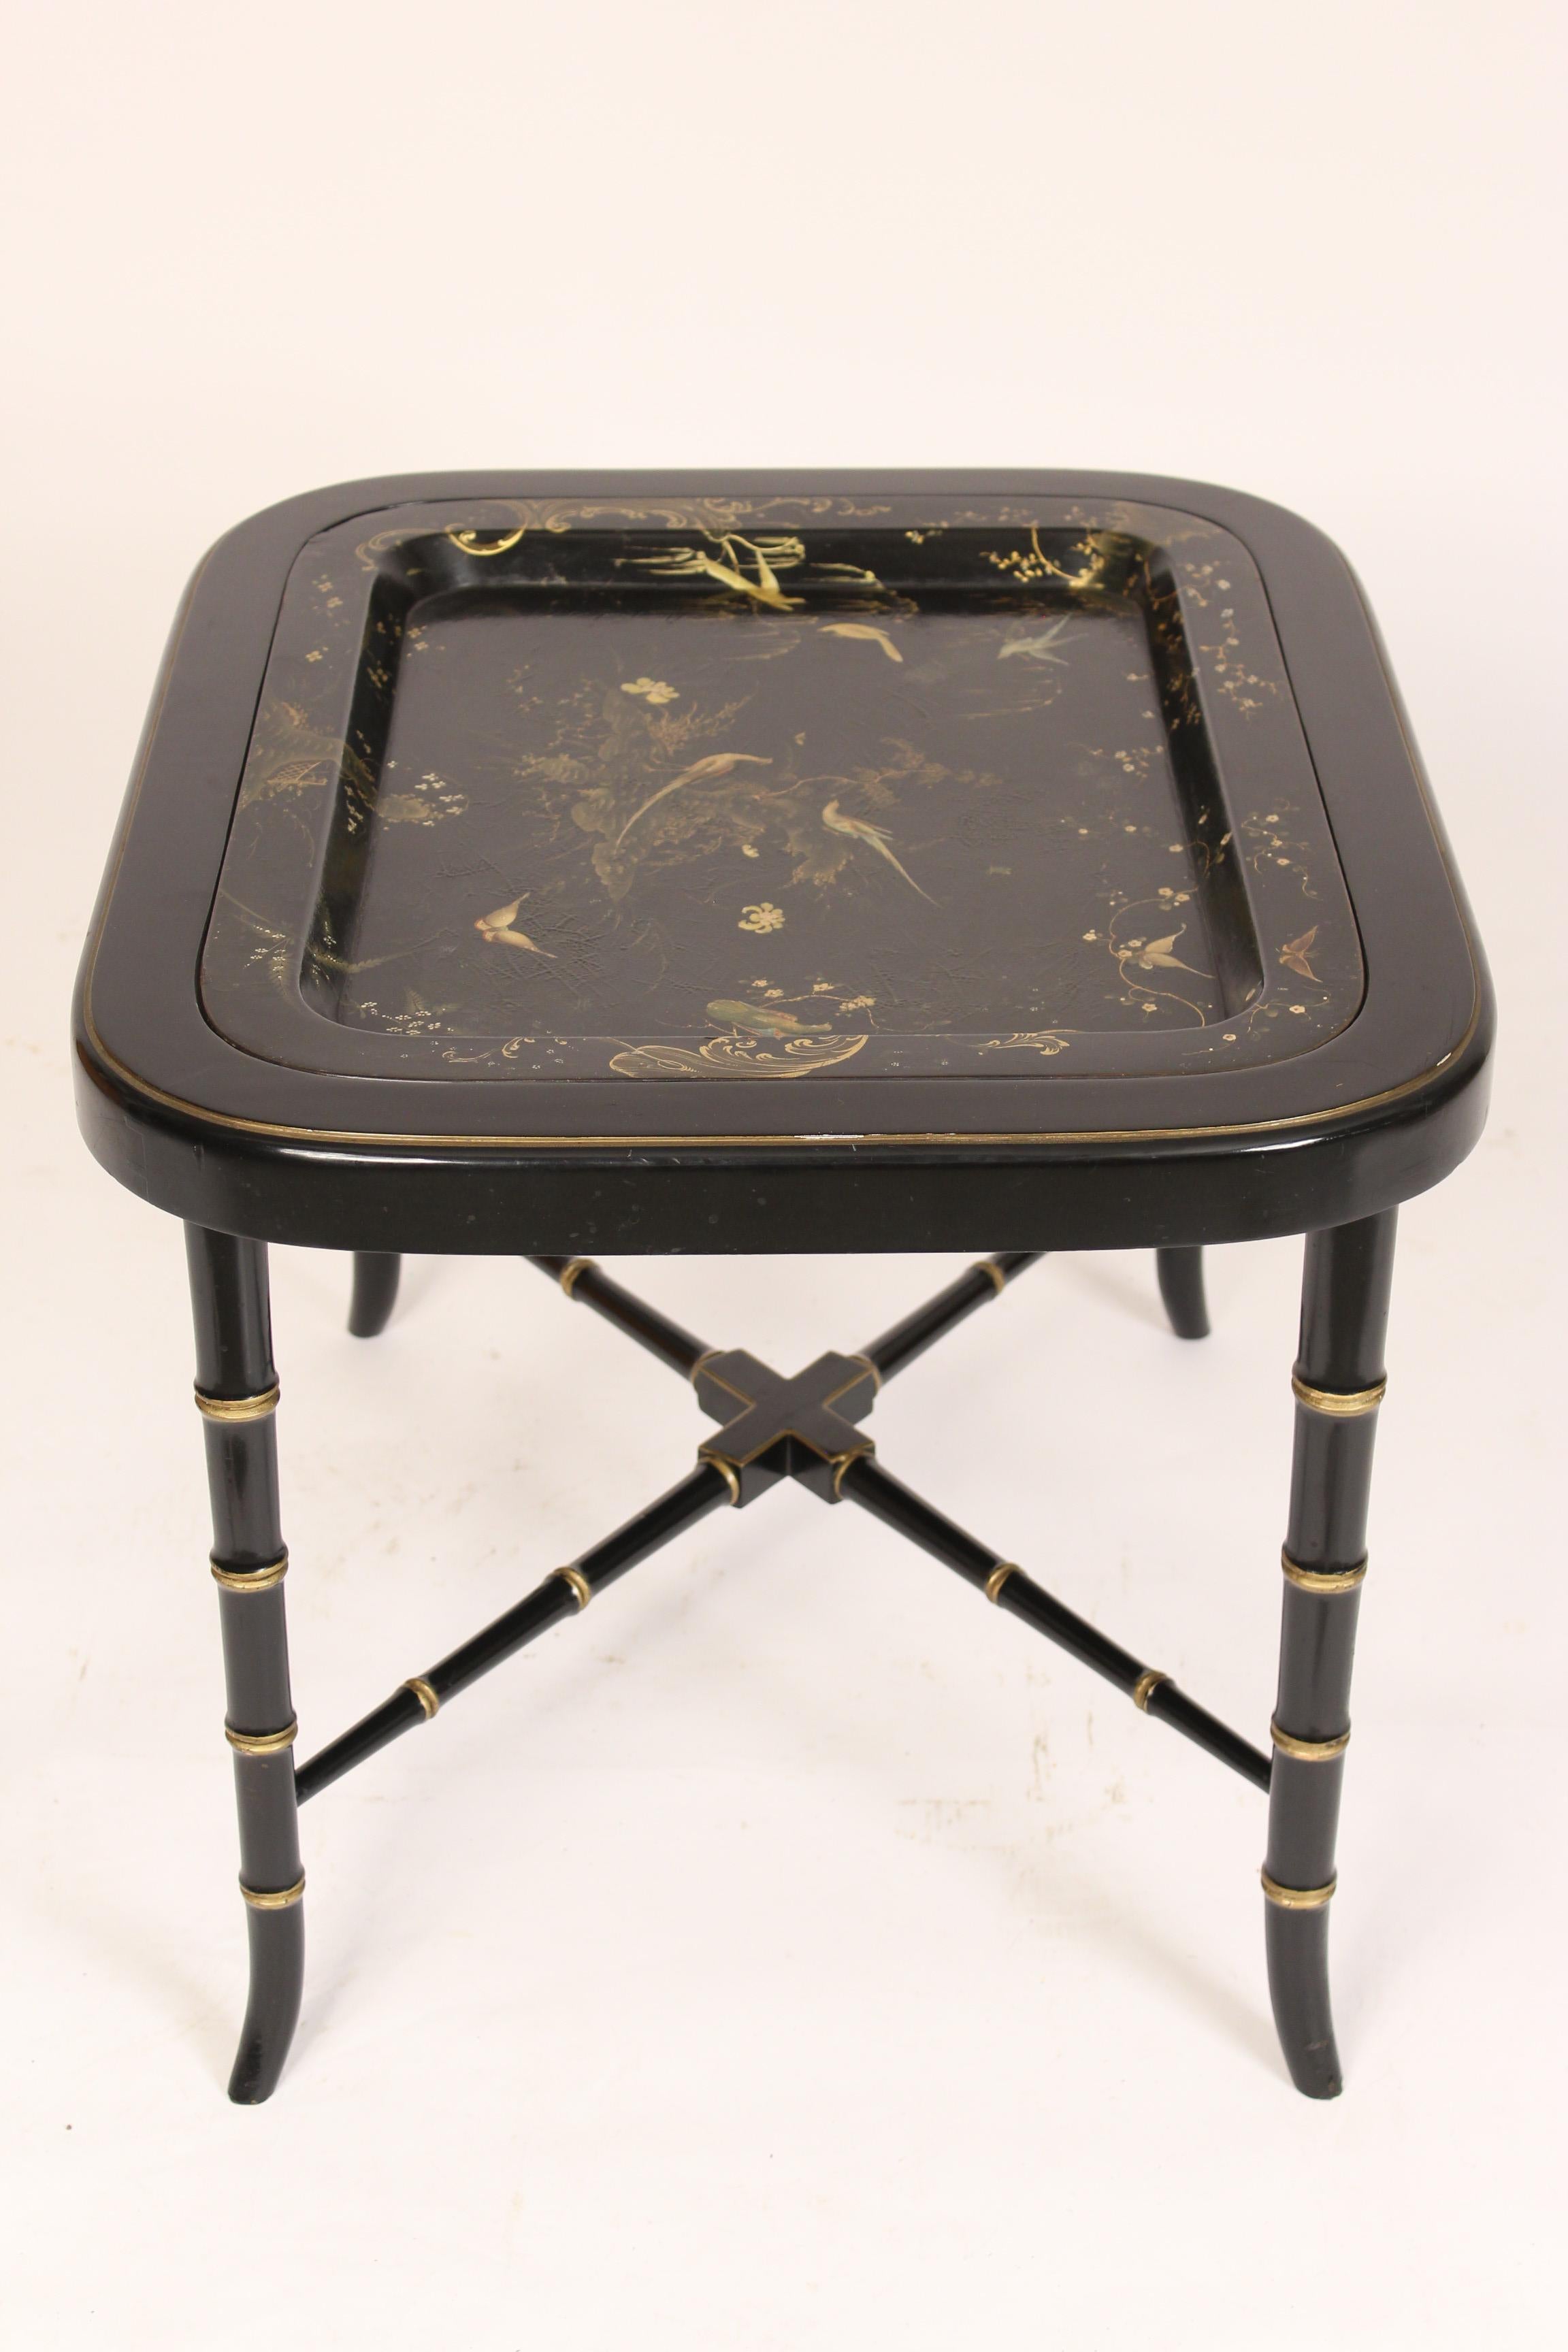 Early 20th Century English Regency Style Black Lacquer Tray Table